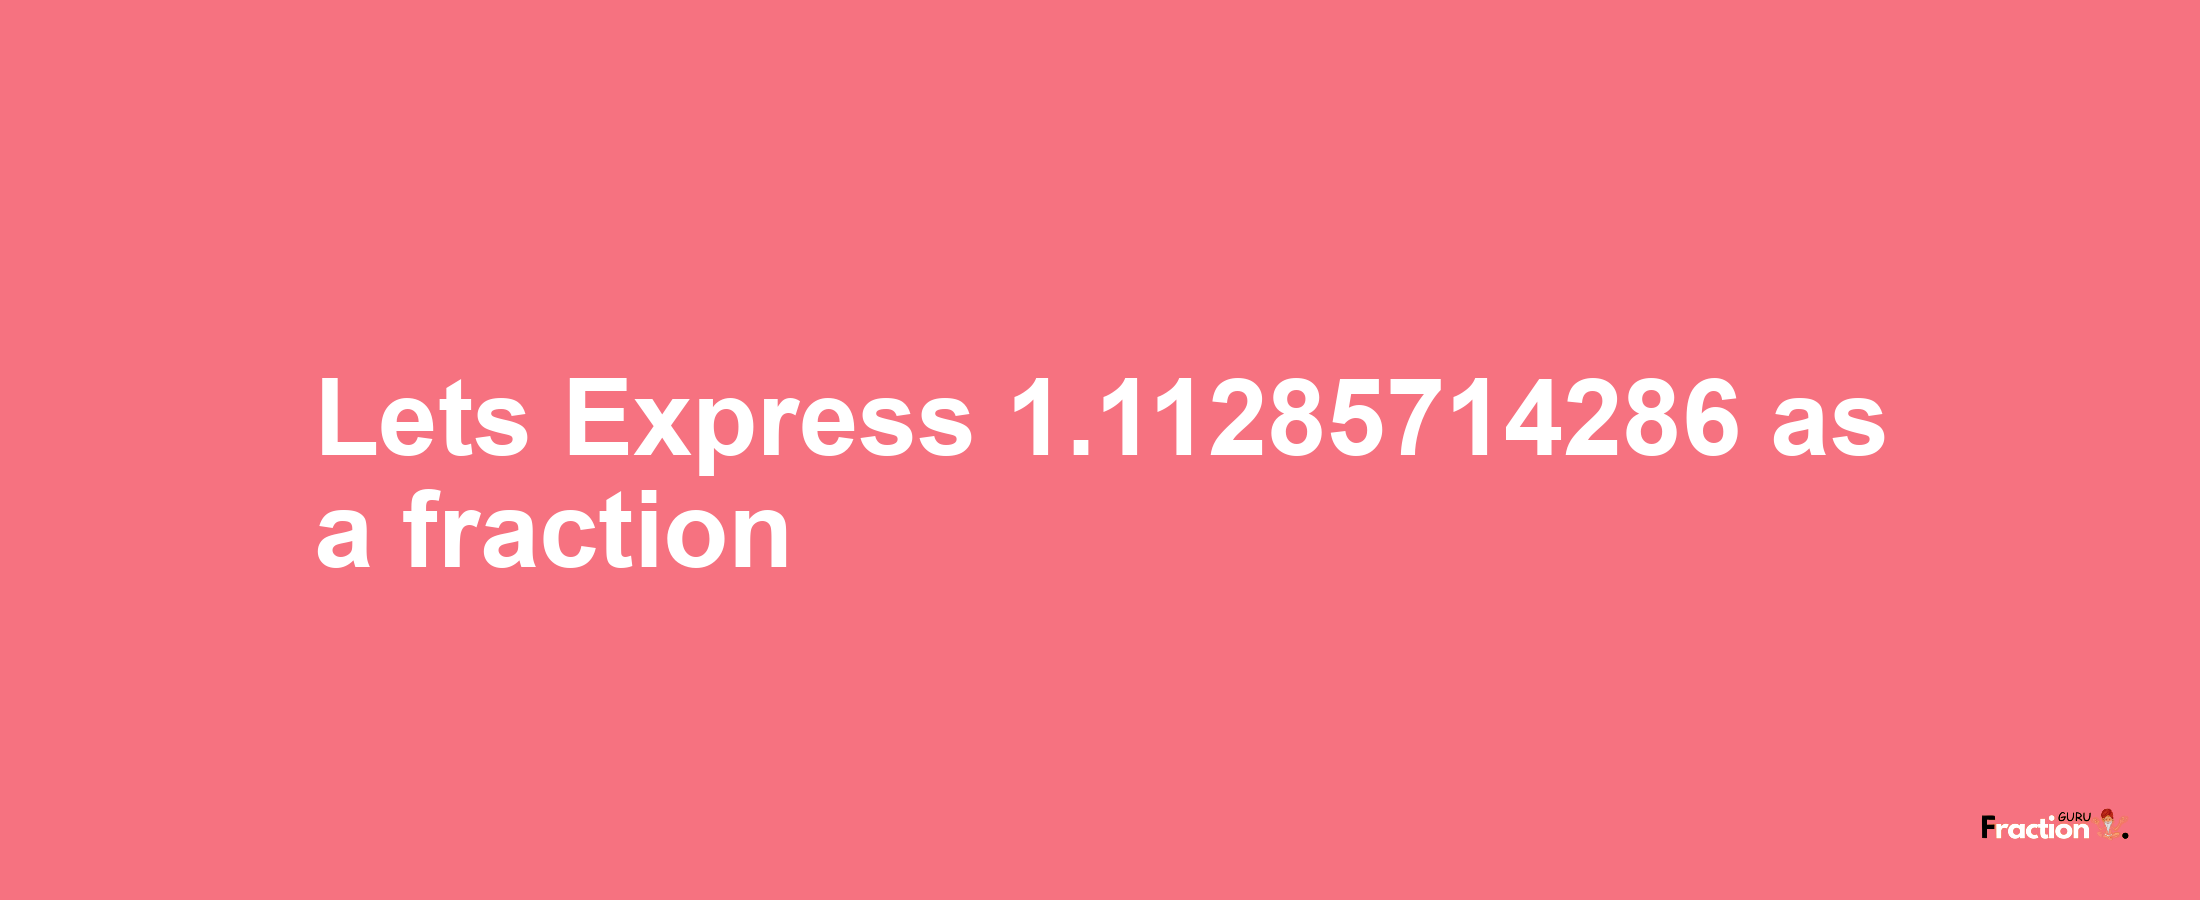 Lets Express 1.11285714286 as afraction